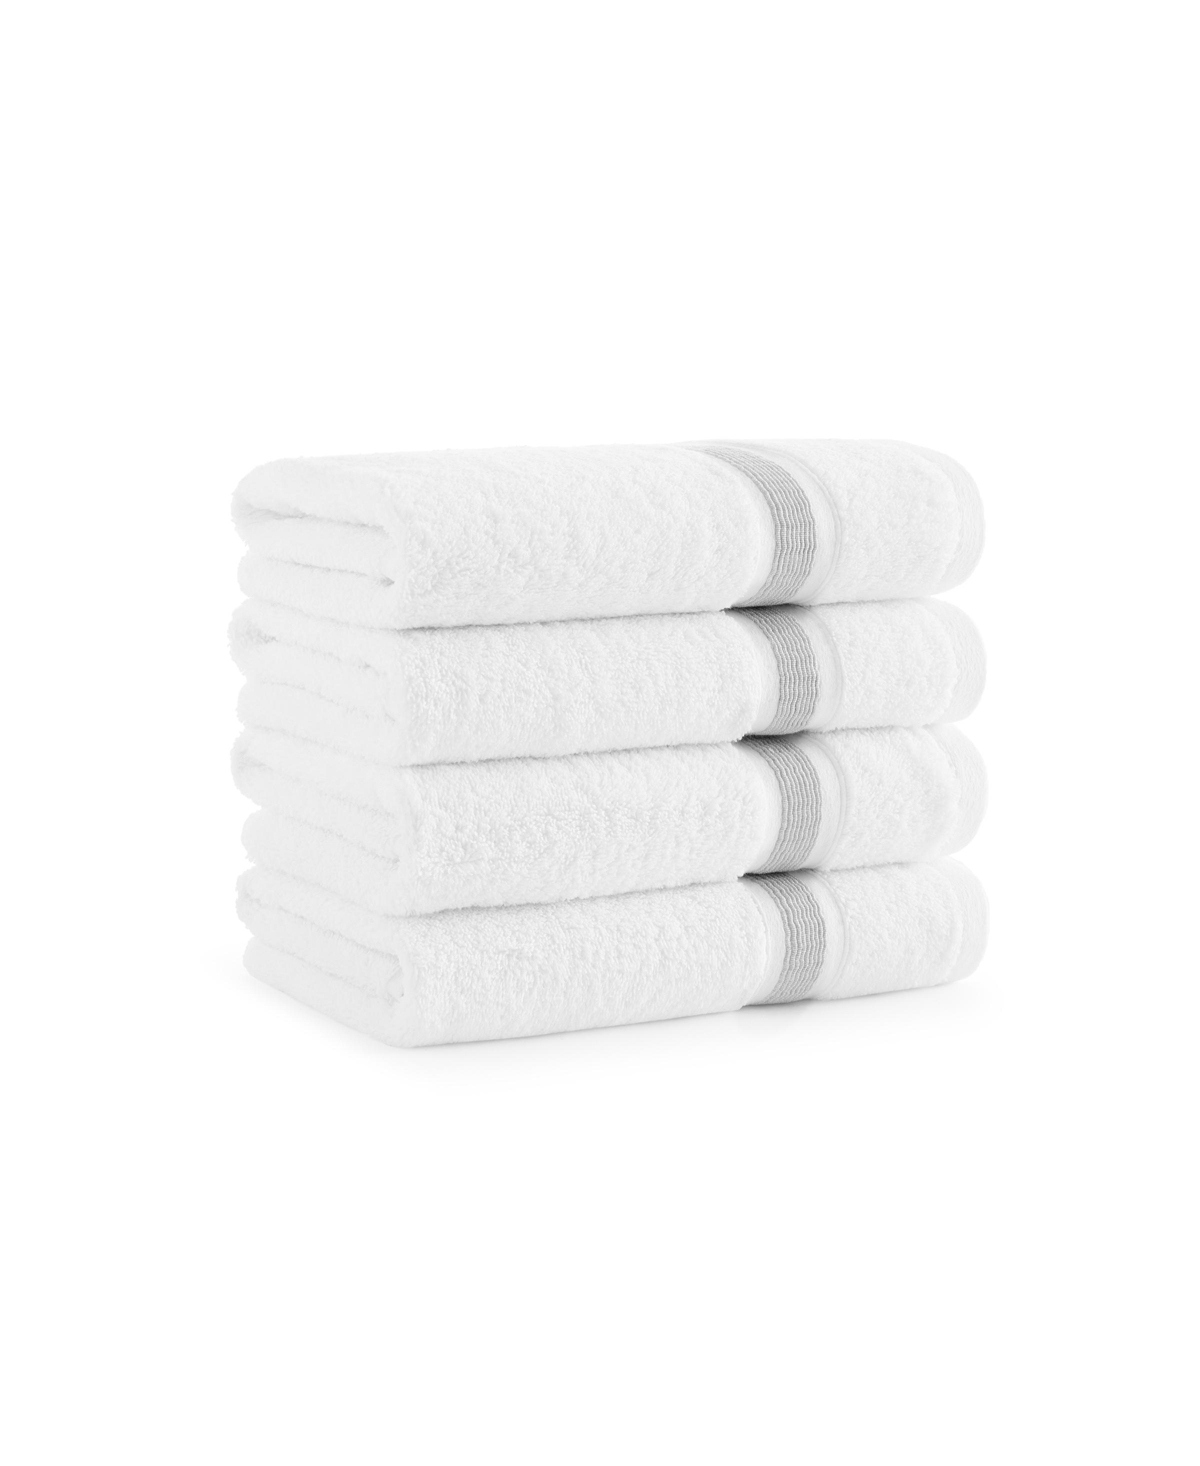 Aston And Arden Aegean Eco-friendly Recycled Turkish Hand Towels (4 Pack), 18x30, 600 Gsm, White With Weft Woven Str In Light Gray